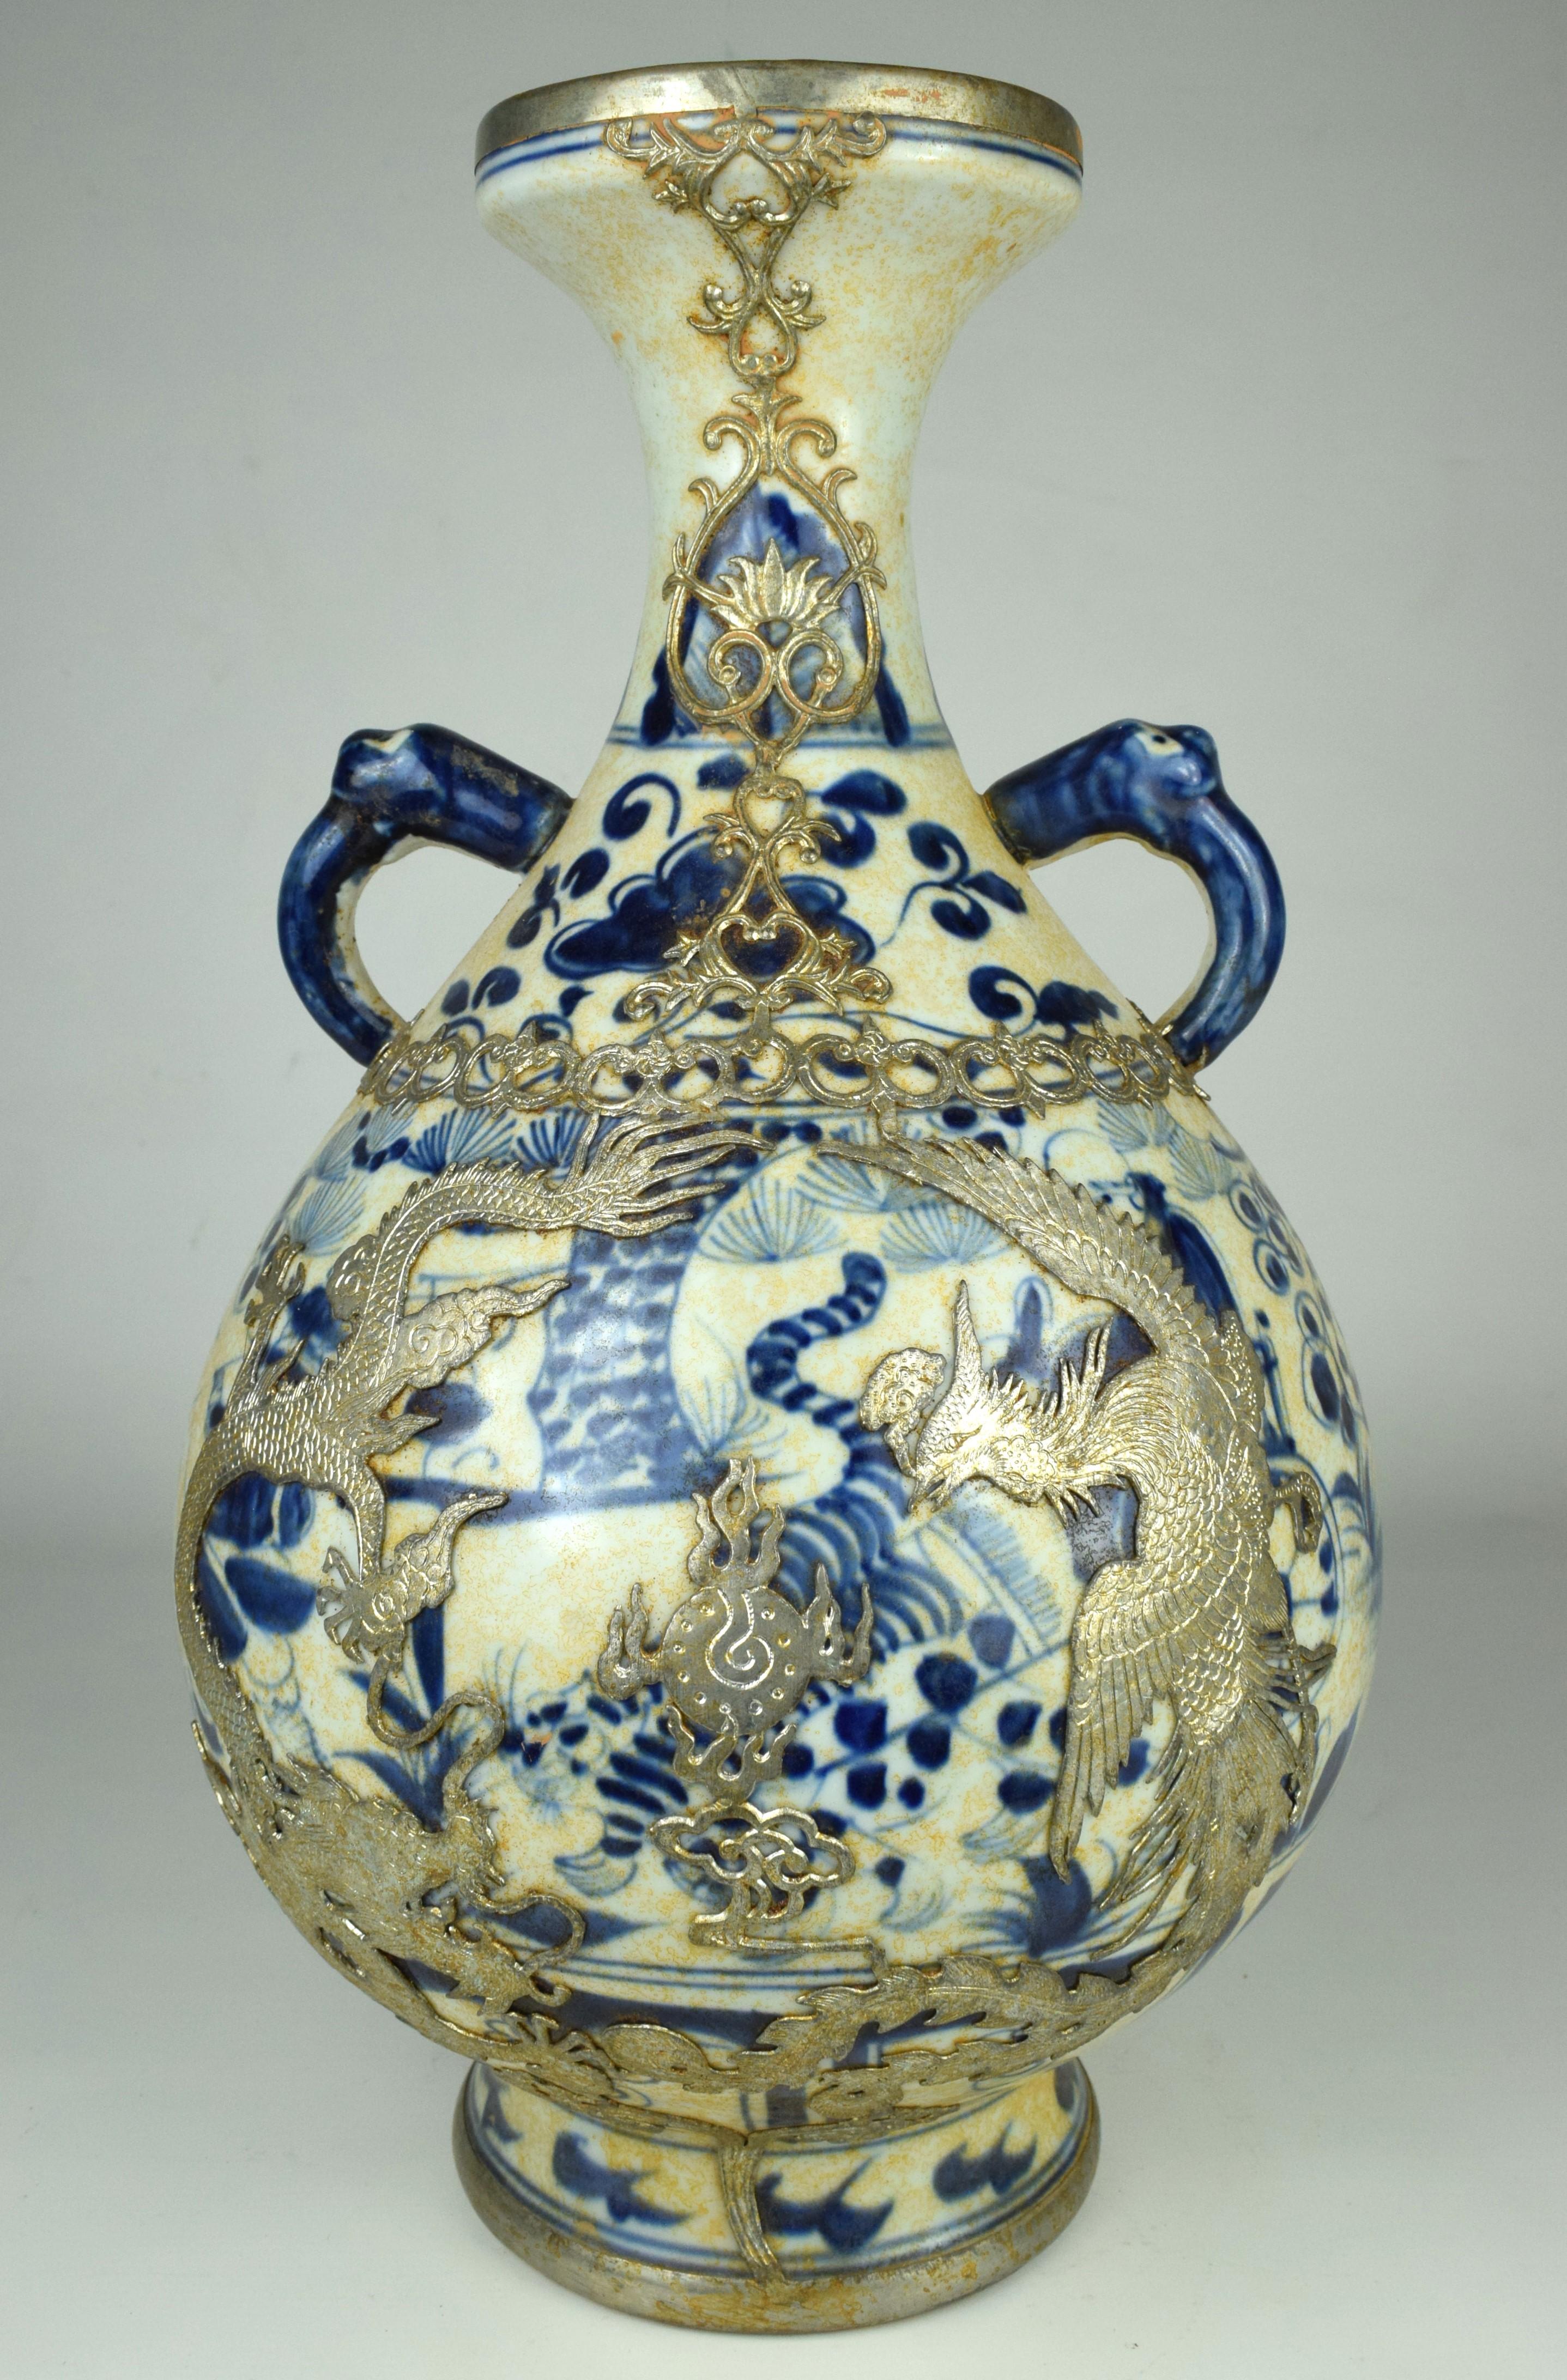 The pair of Blue White Porcelain Vases with Gilt Silver Phoenix Dragons, dating from the 20th century, is an exquisite examples of decorative art, blending traditional Chinese porcelain craftsmanship with intricate silver detailing.

The vases have